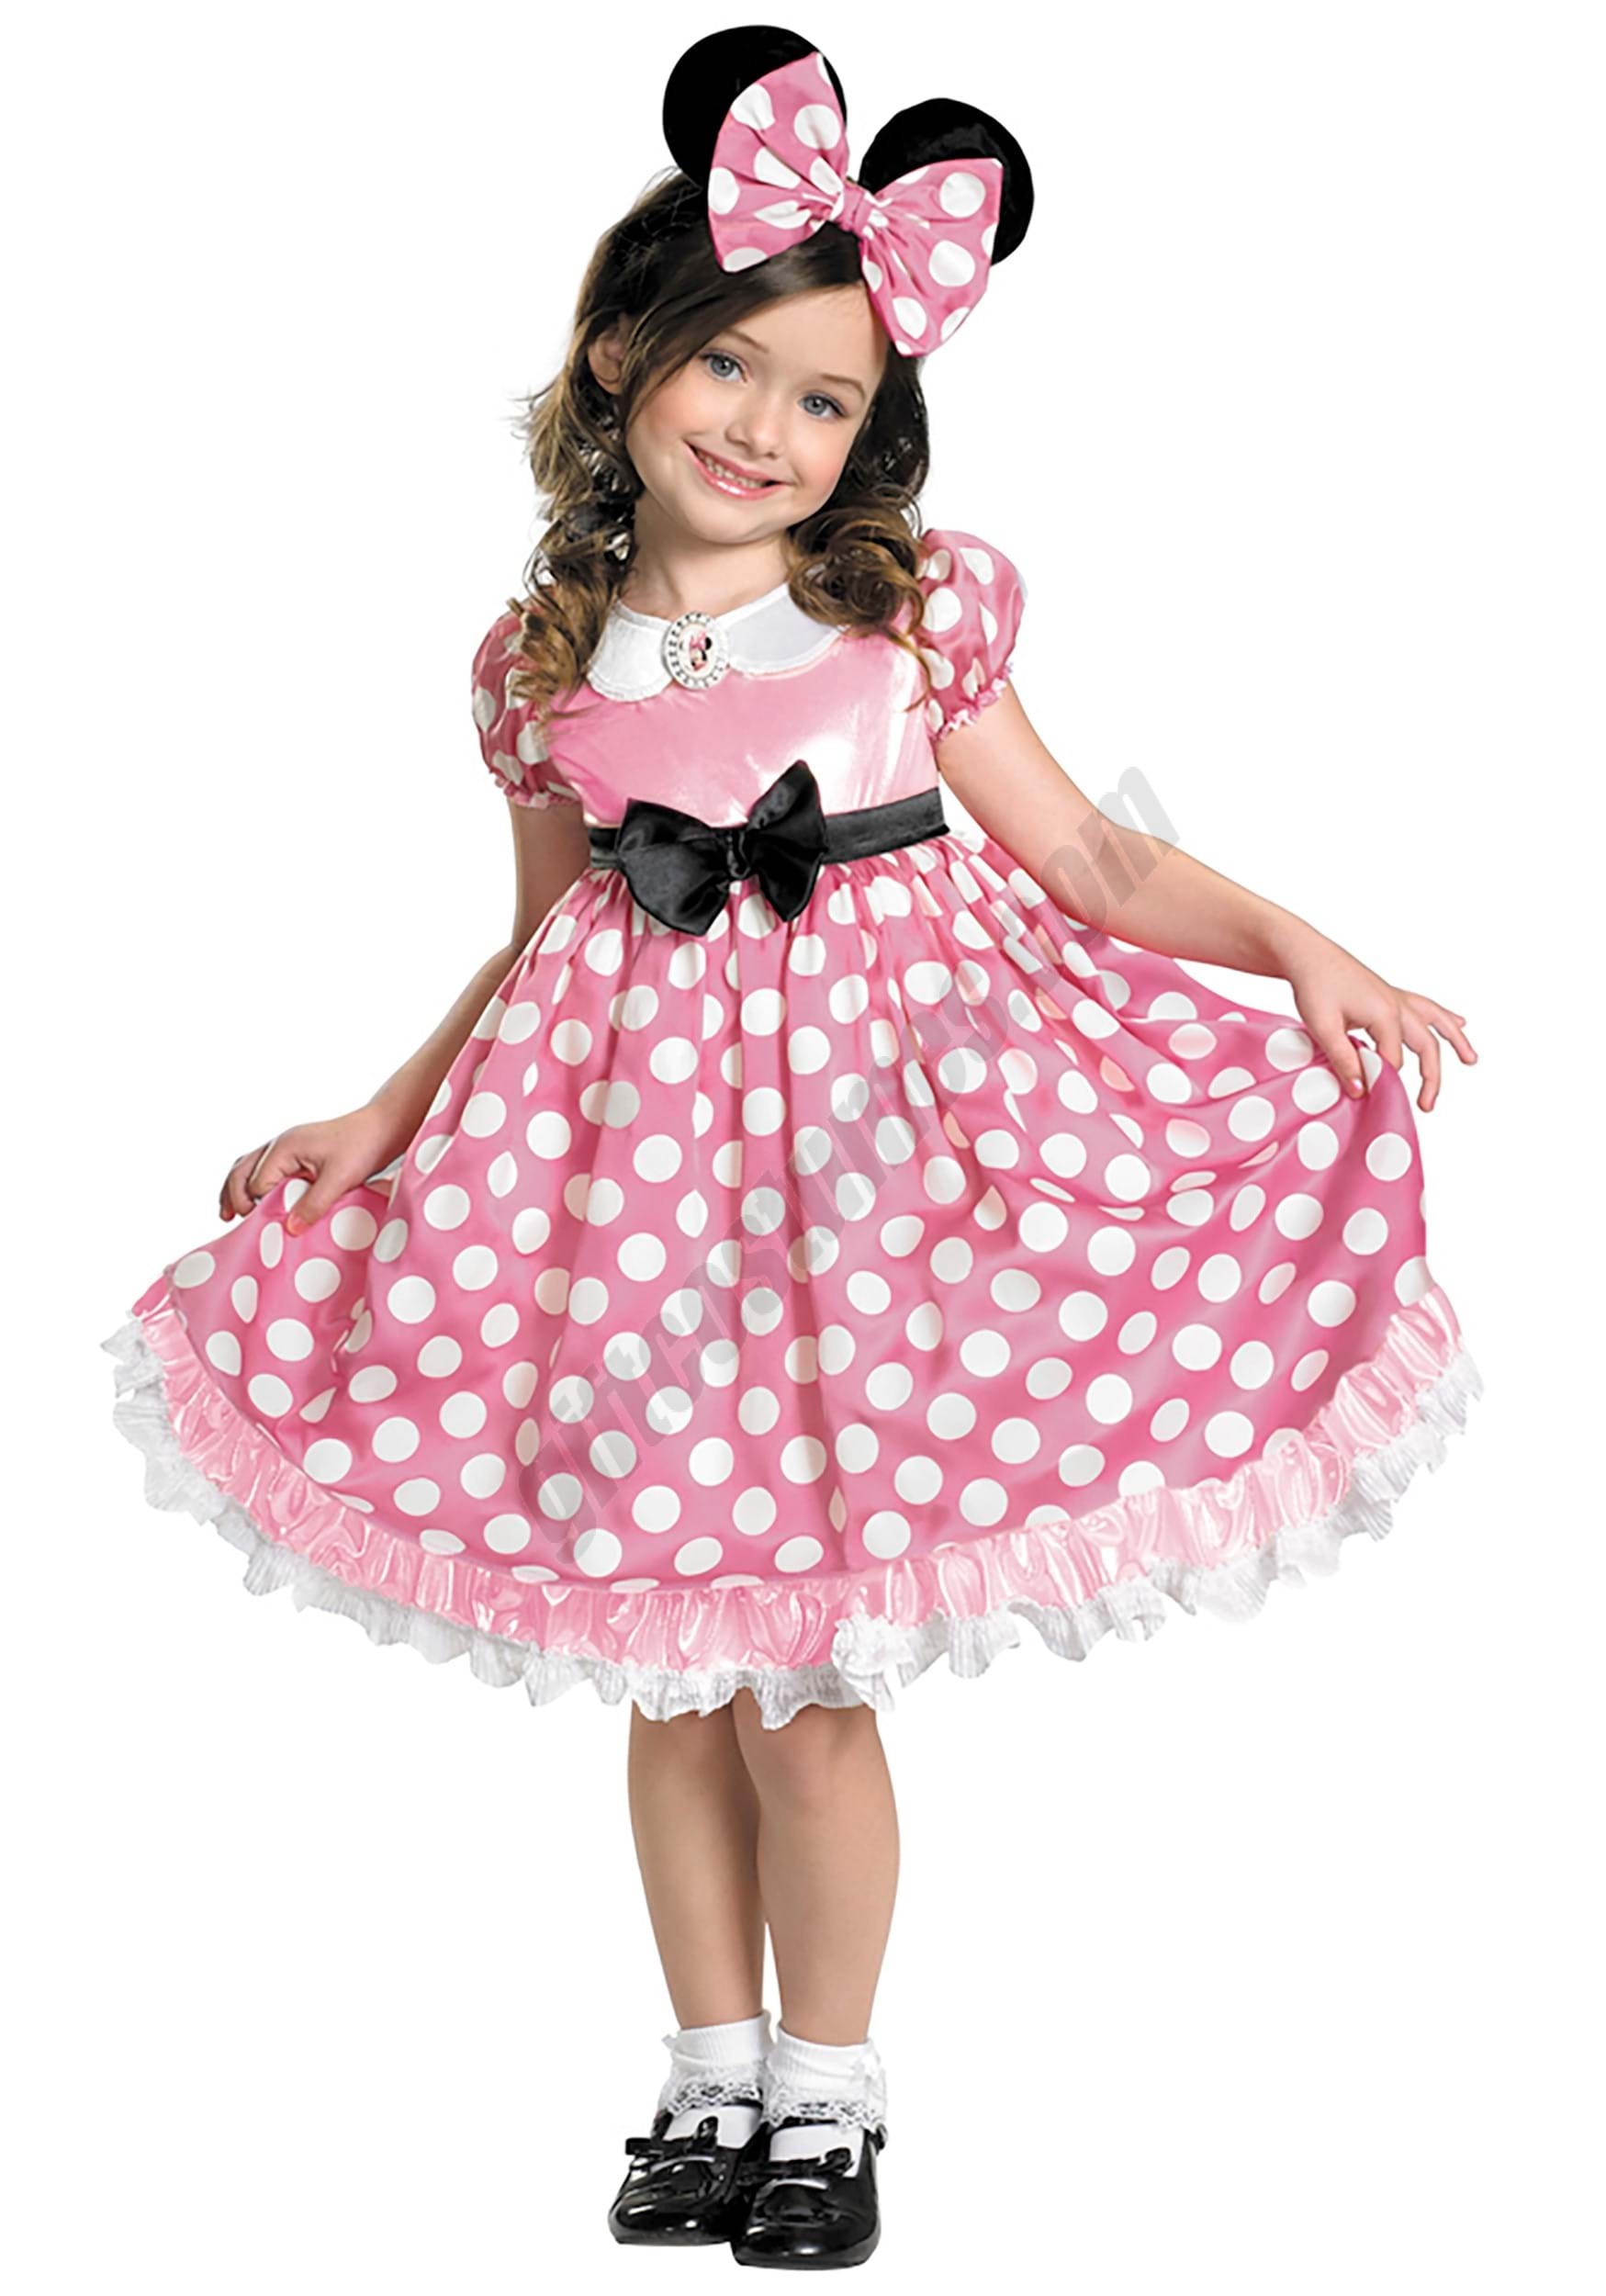 Minnie Mouse Girls Glow in the Dark Dot Pink Dress Promotions - Minnie Mouse Girls Glow in the Dark Dot Pink Dress Promotions